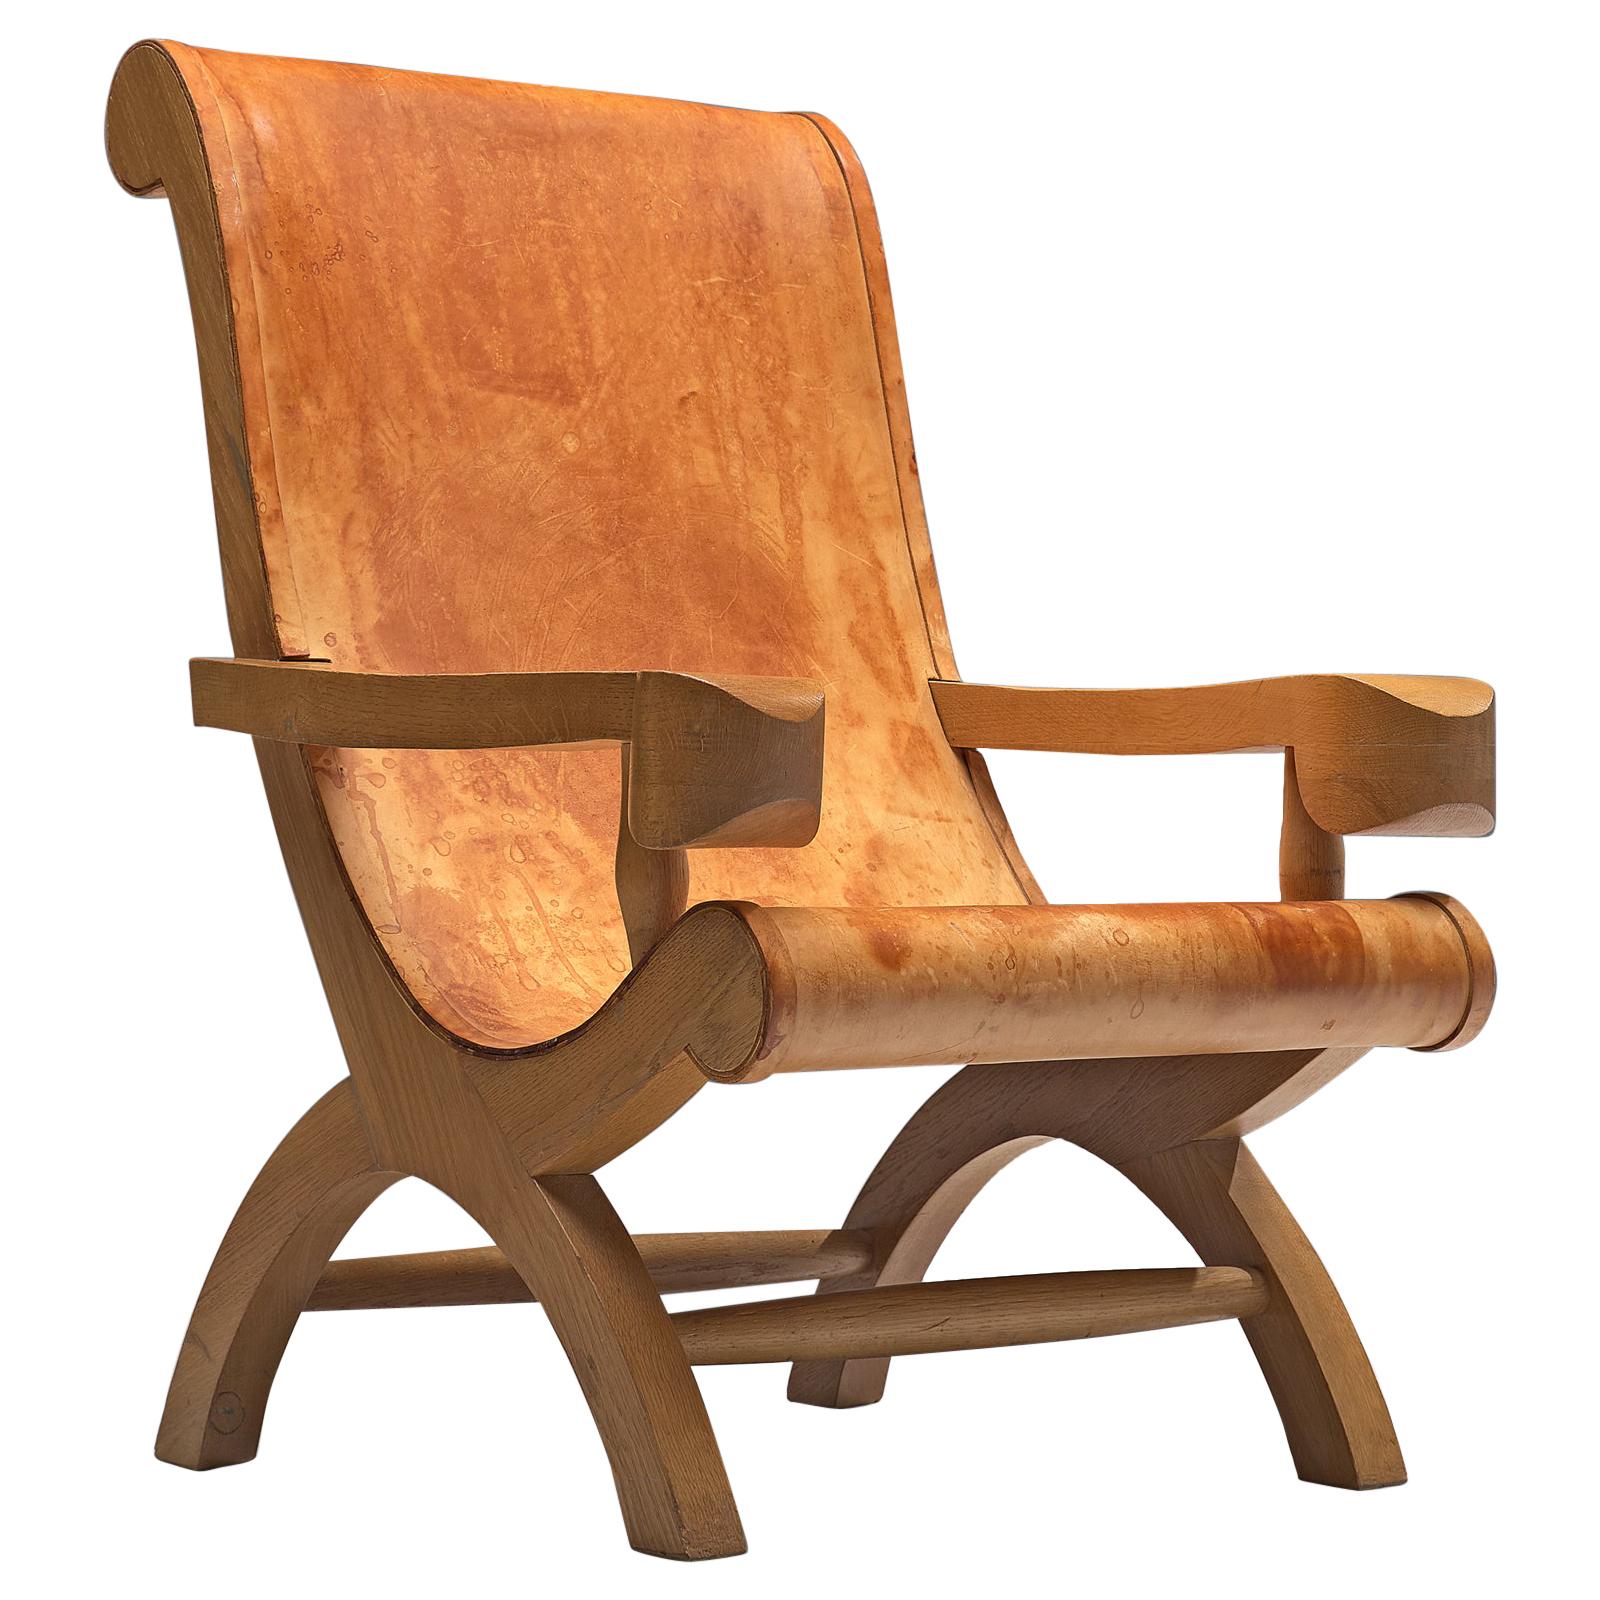 Clara Porset Butaque Lounge Chair in Cognac Leather For Sale at 1stDibs ...